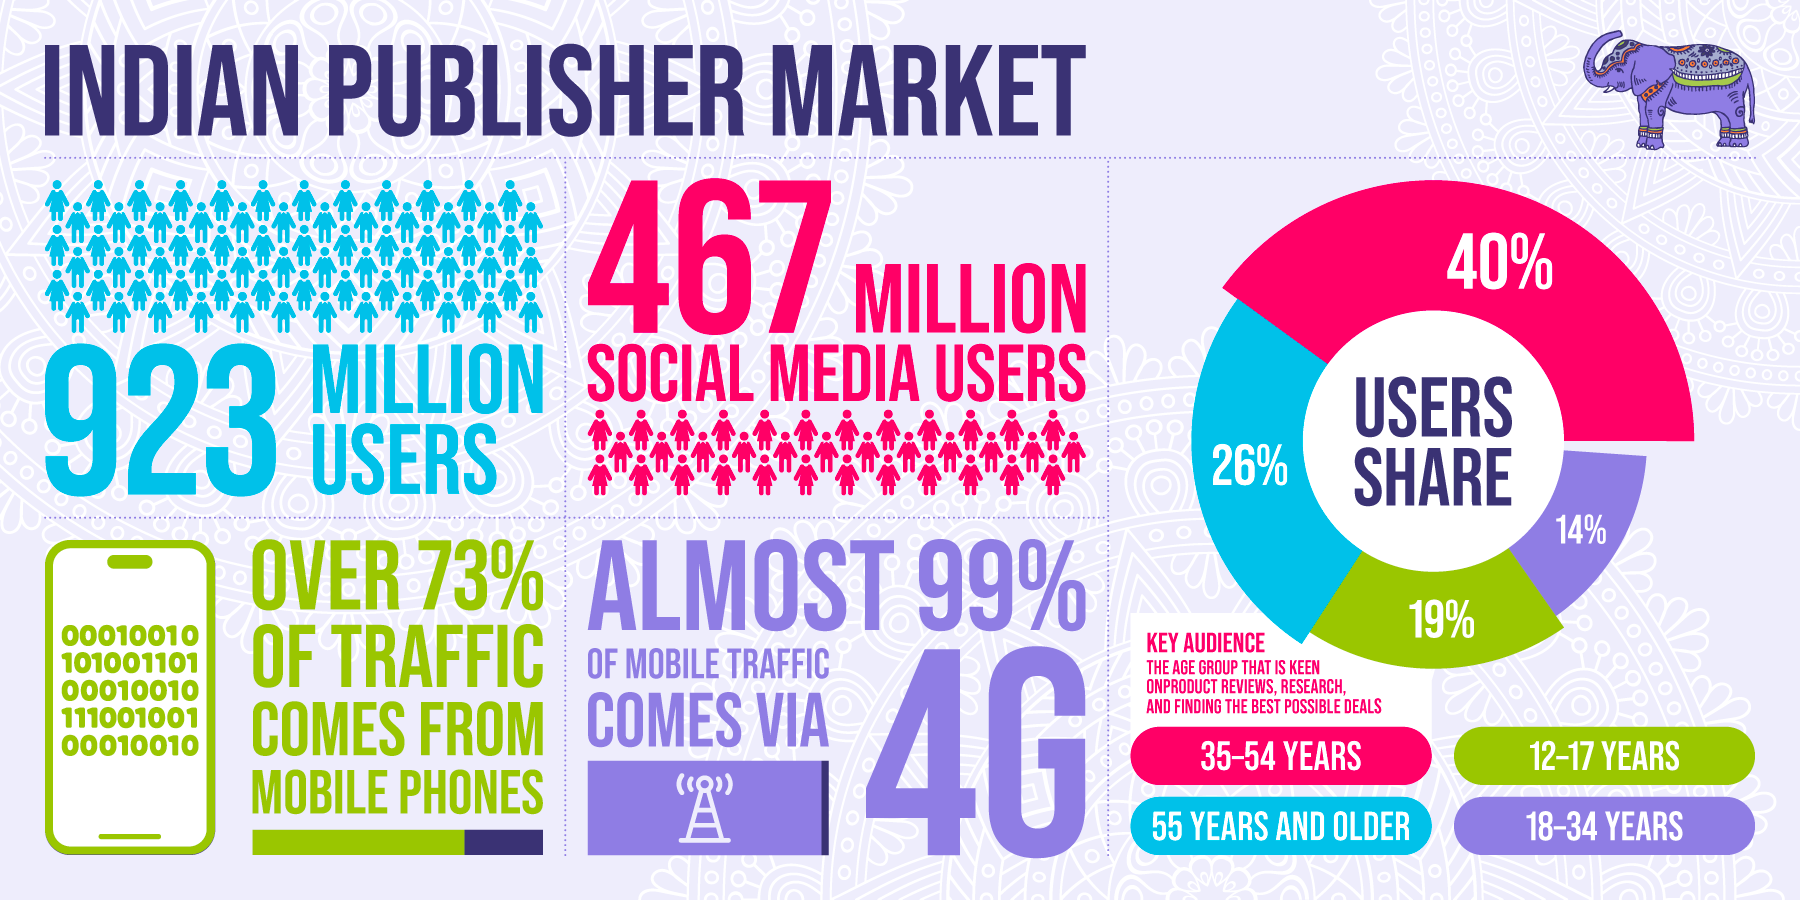 Monetag - Indian publisher market overview